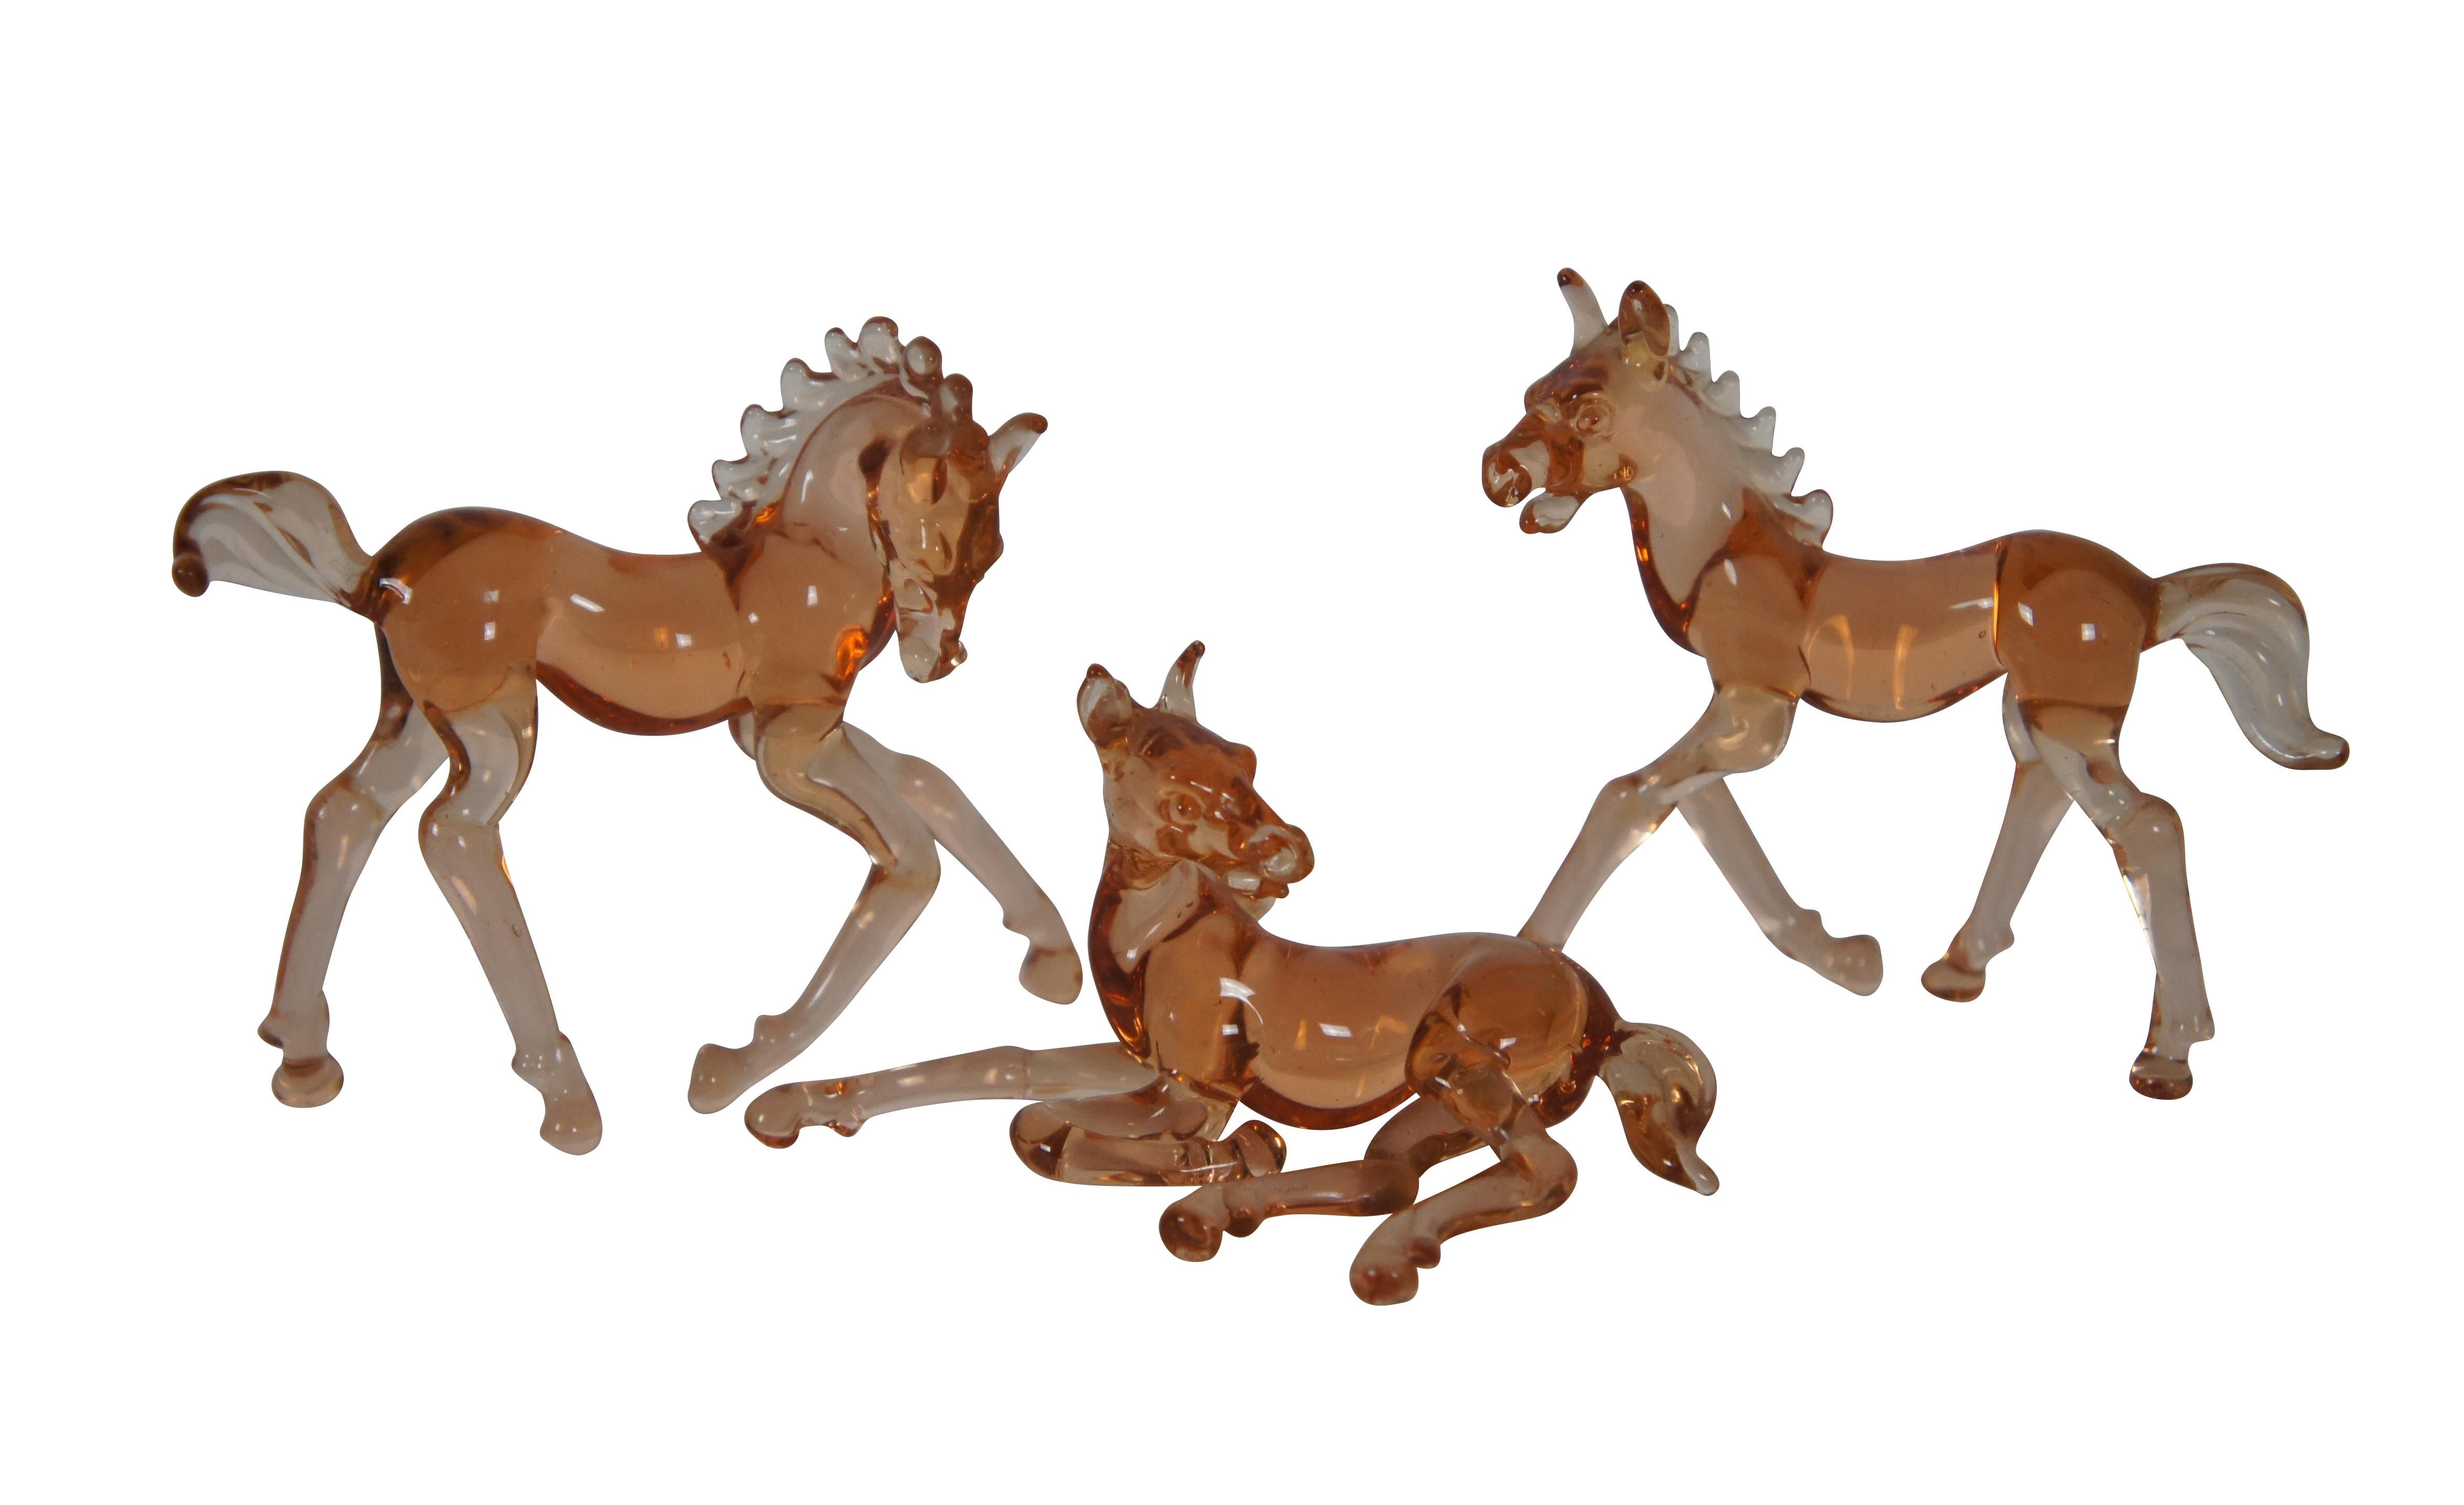 Seven vintage hand blown animals.  Made of amber art glass featuring three Horses and two Bengal Tigers.  Murano or German.

Dimensions:
Approx - 2.75” x 0.75” x 2.5” (Width x Depth x Height)